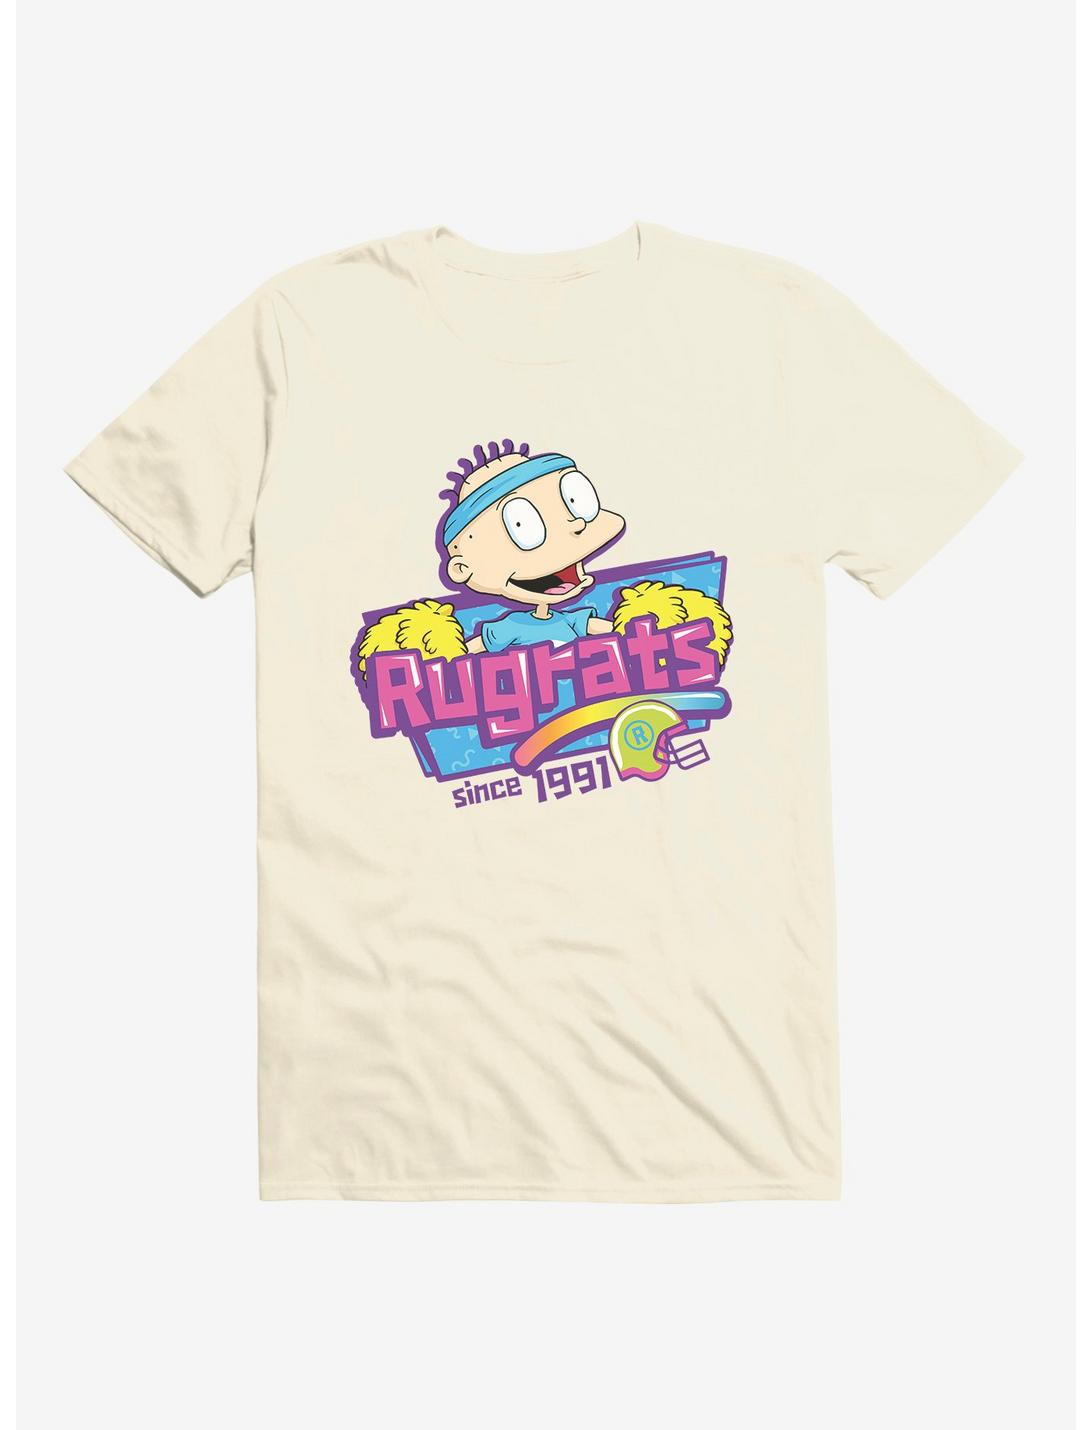 Extra Soft Rugrats Since 1991 Tommy T-Shirt, SPRING YELLOW, hi-res